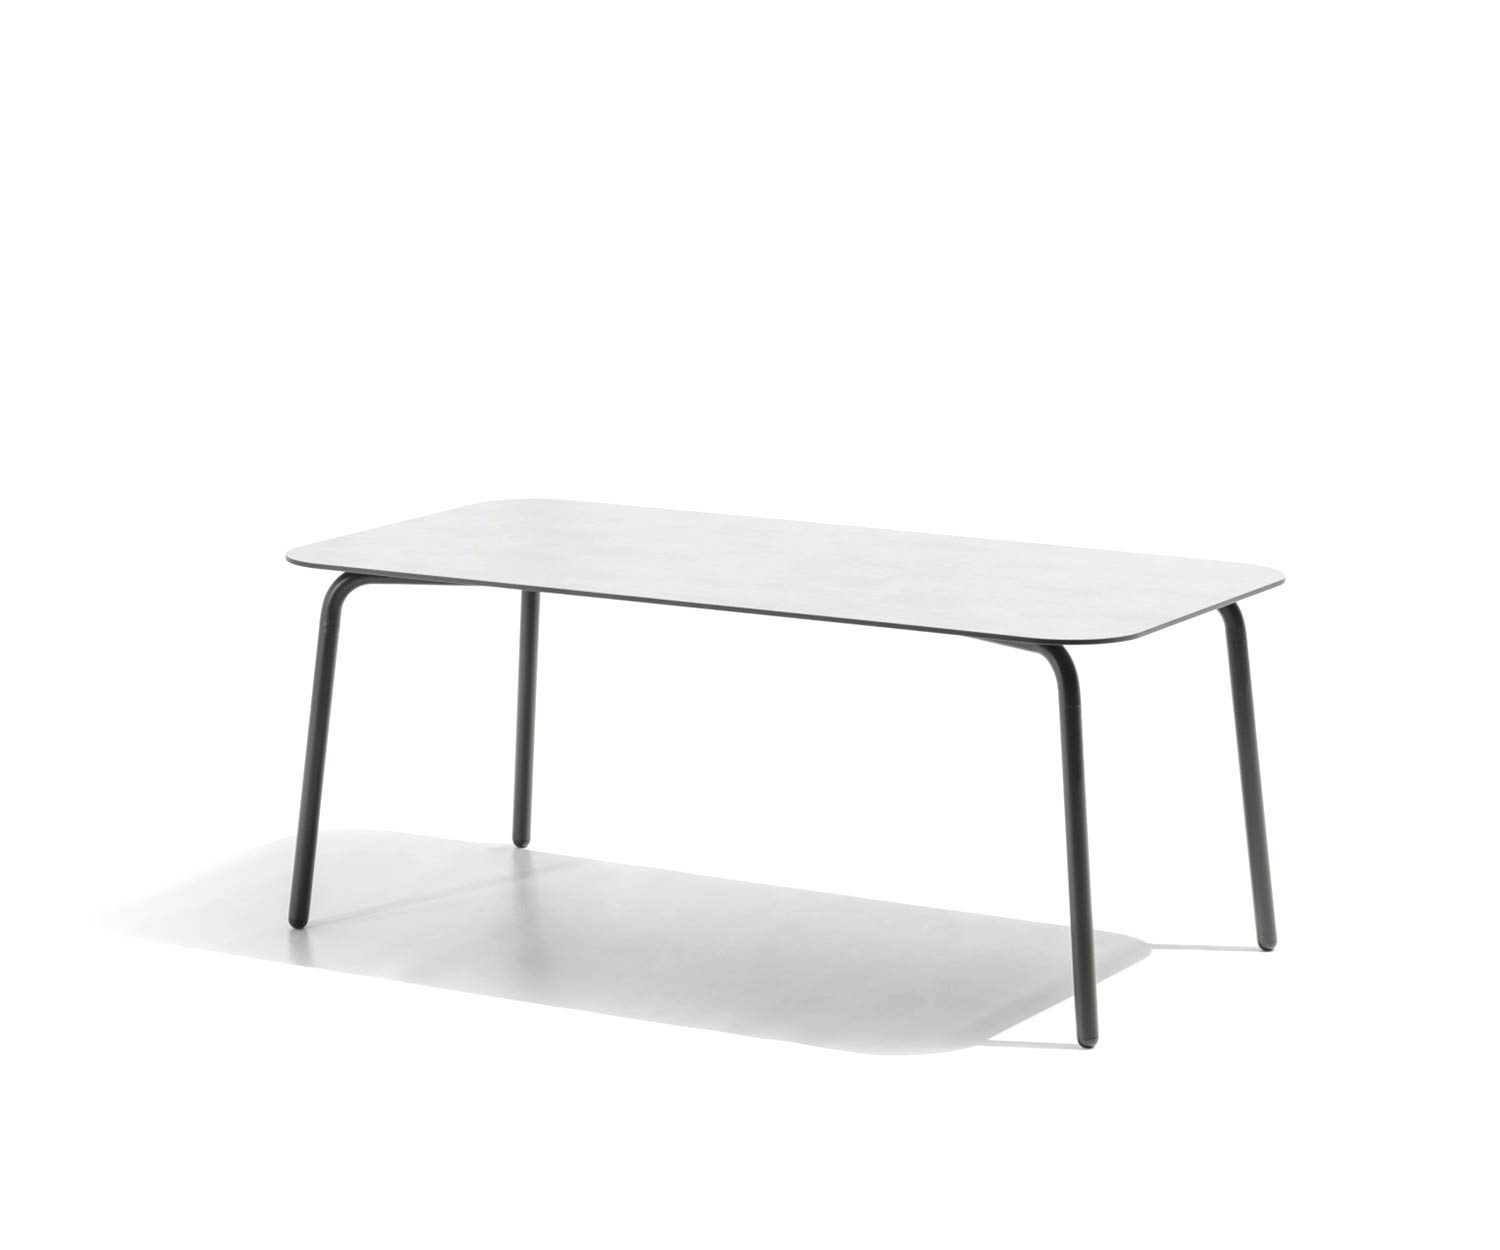 Exclusive Todus Condor design garden table with powder-coated stainless steel frame